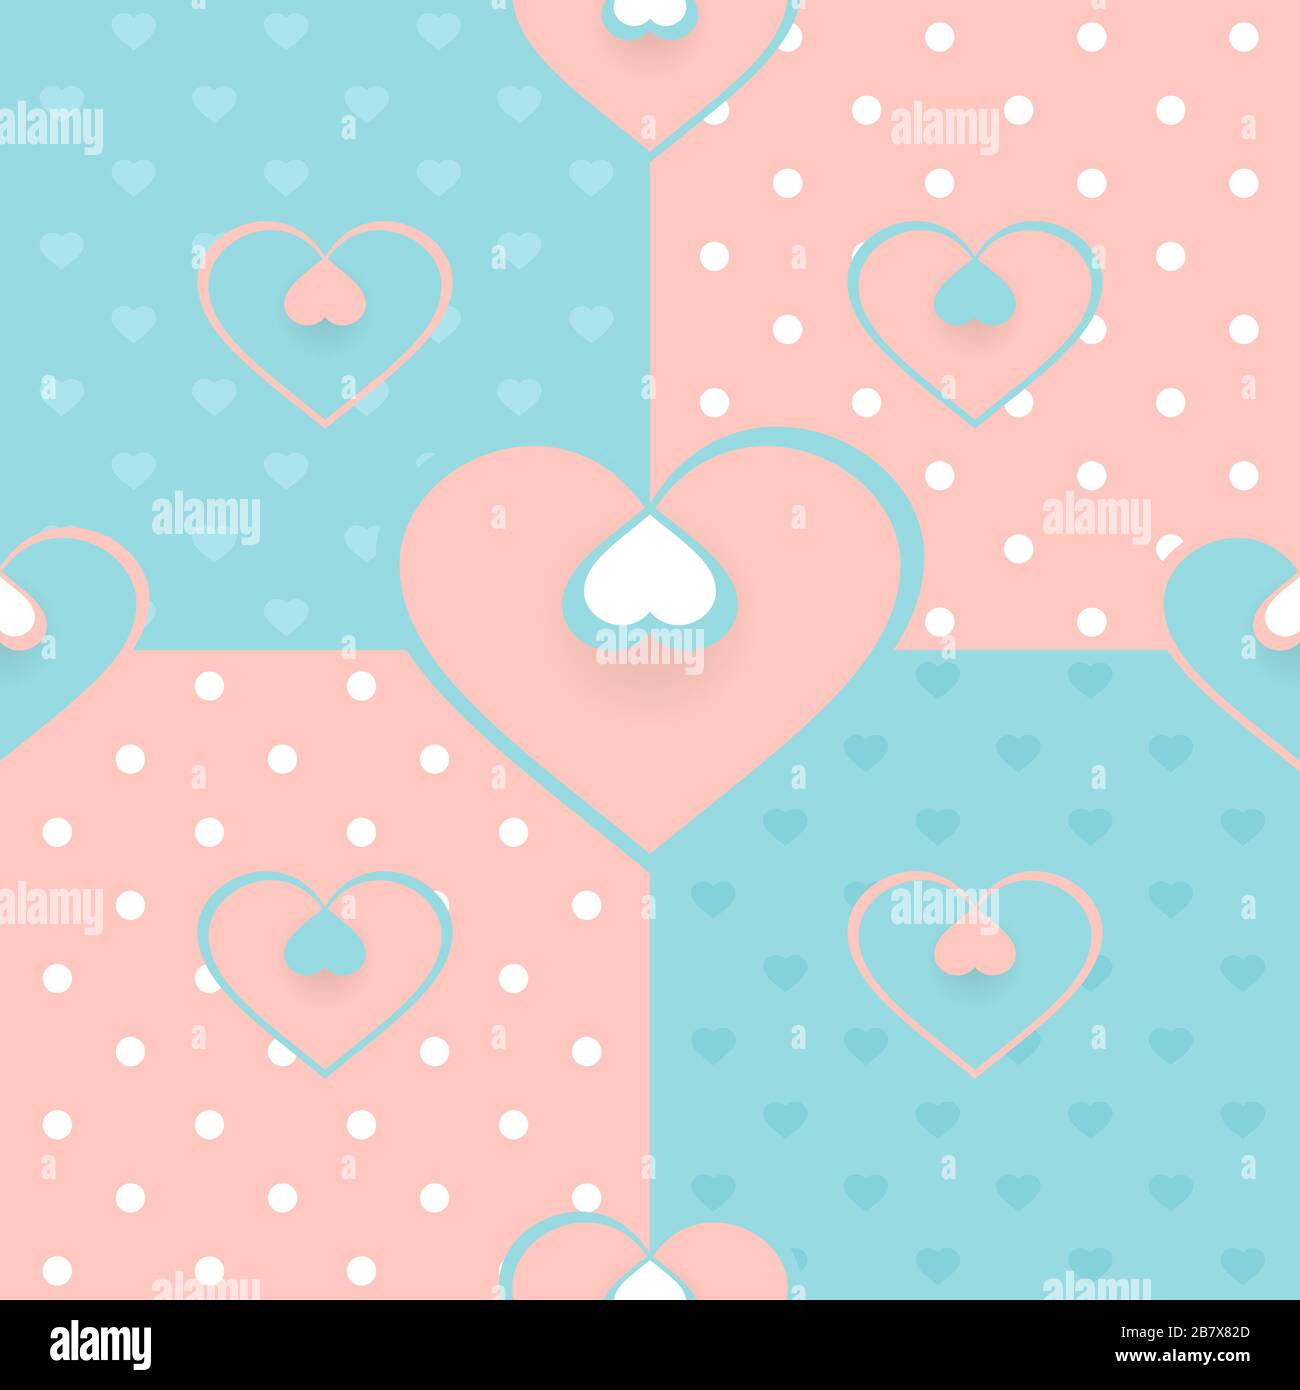 Template with hearts for design Valentines Day in pastel colors. vector illustration Stock Vector